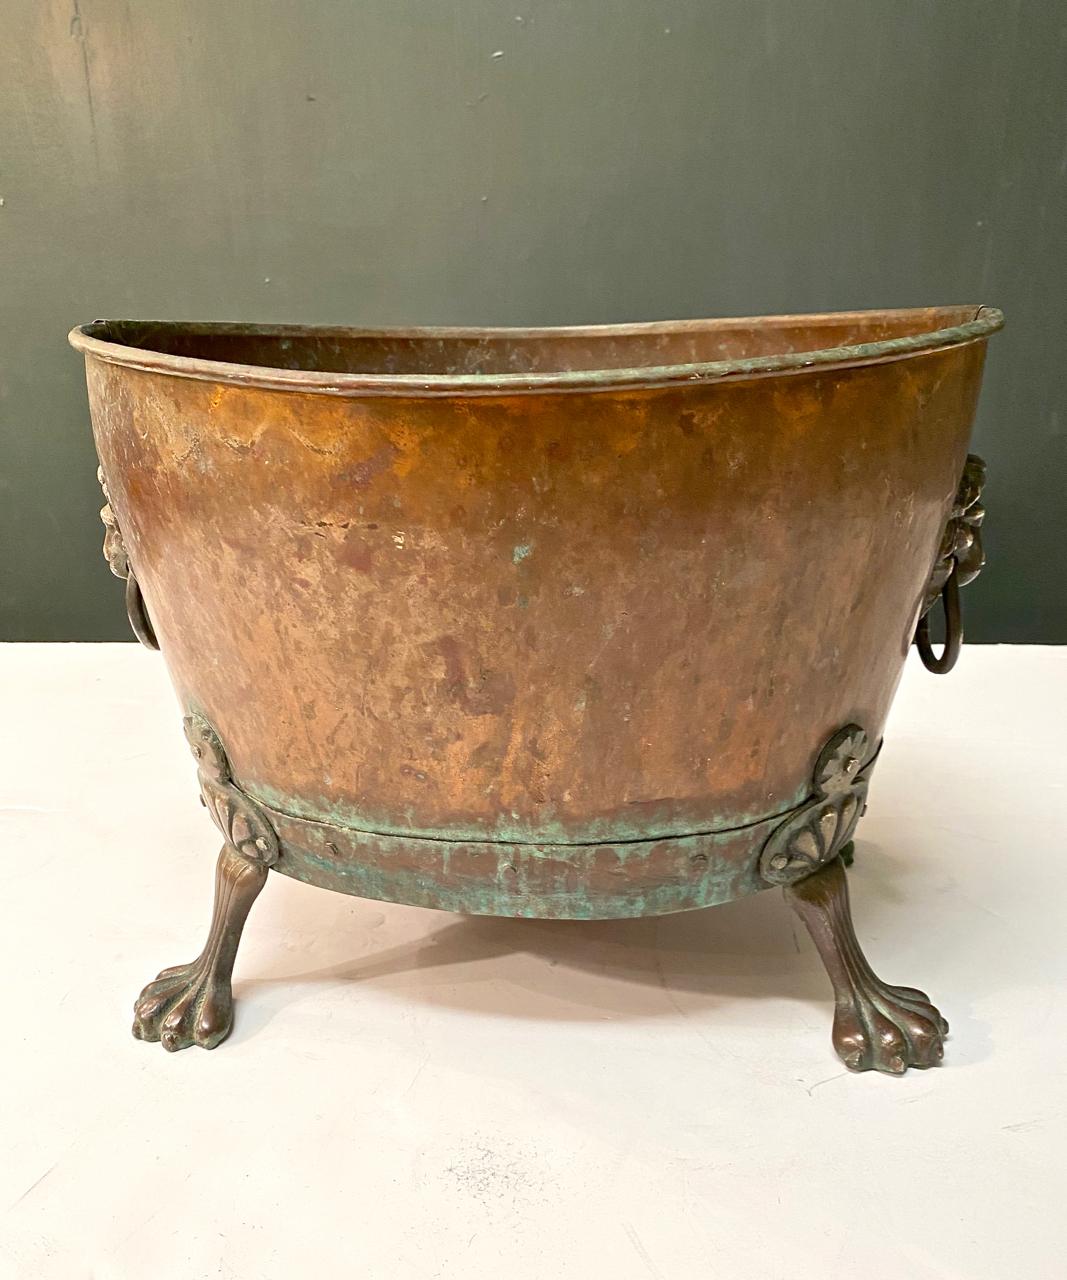 Early Victorian English Brass and Copper Coal Bin